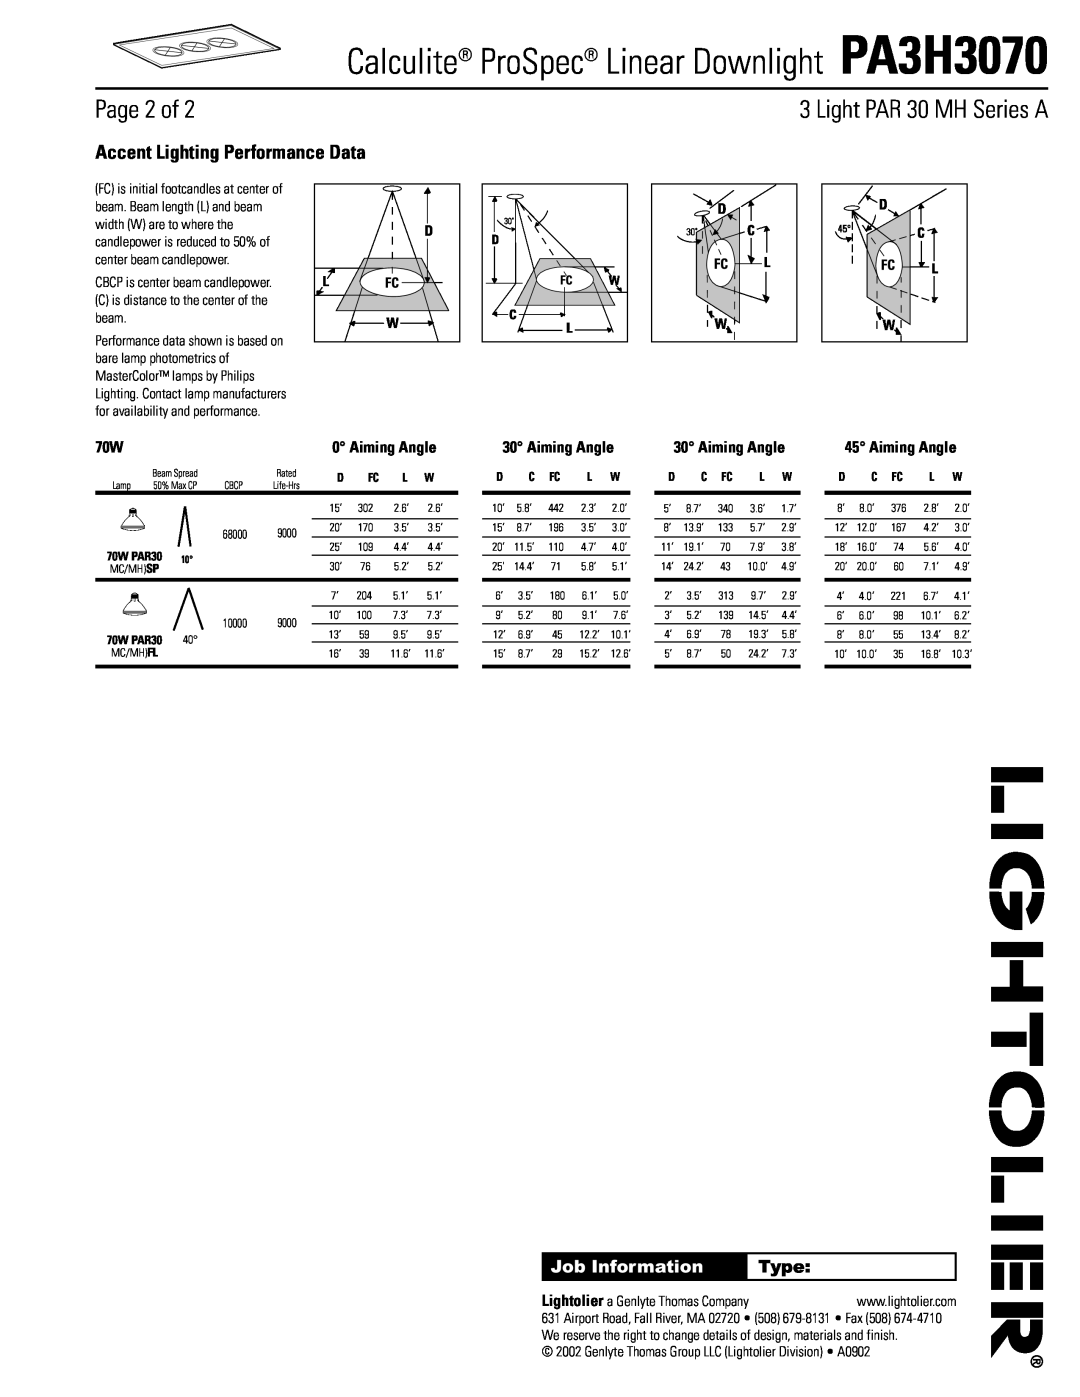 Lightolier Page 2 of, Accent Lighting Performance Data, Aiming Angle, Calculite ProSpec Linear Downlight PA3H3070, Type 